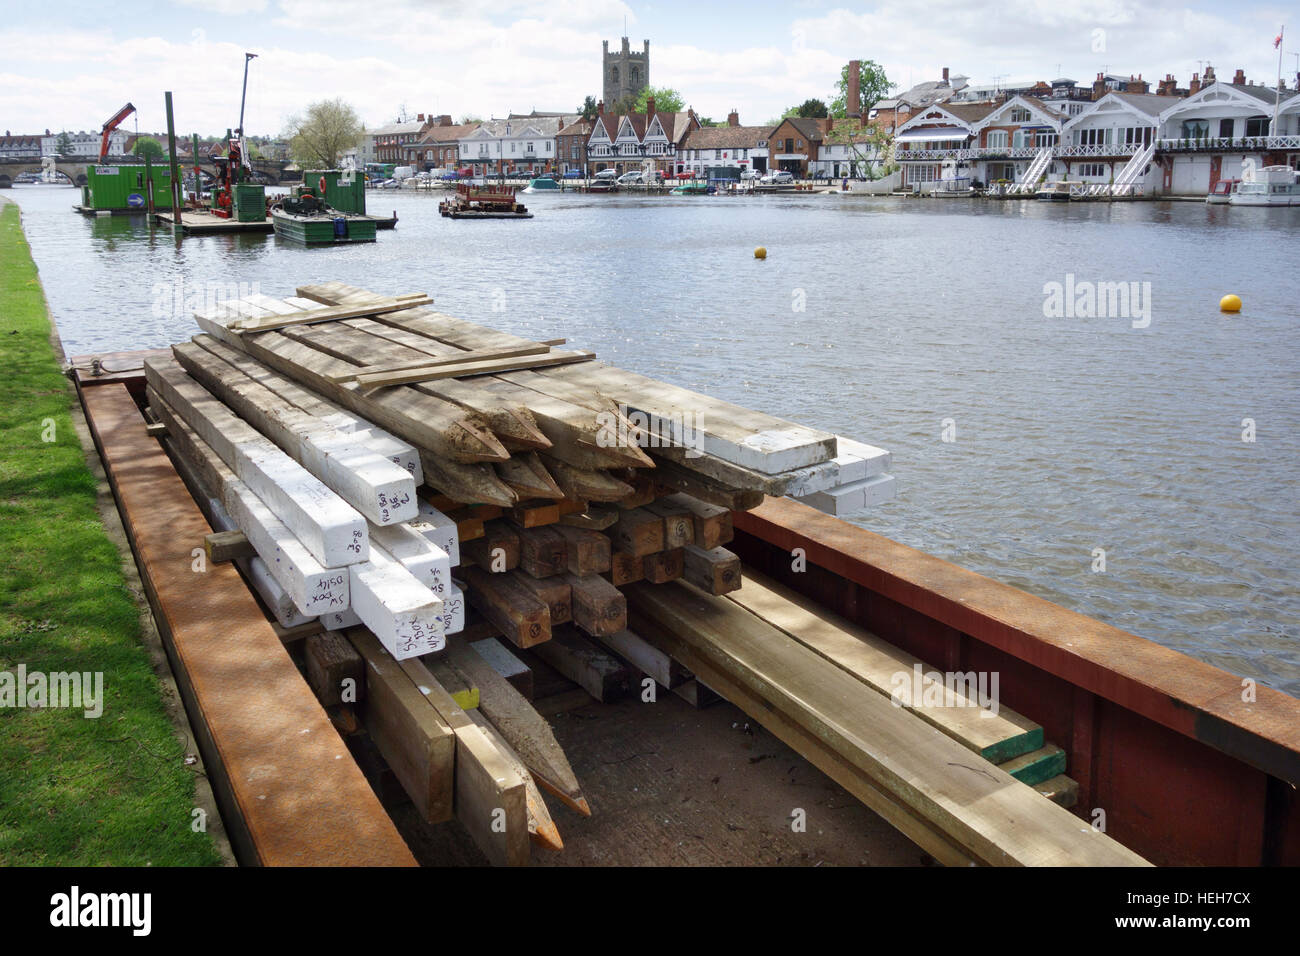 Wooden piles stacked in a barge in preparation for the annual regatta, Henley-on-Thames, Oxfordshire, England, UK Stock Photo